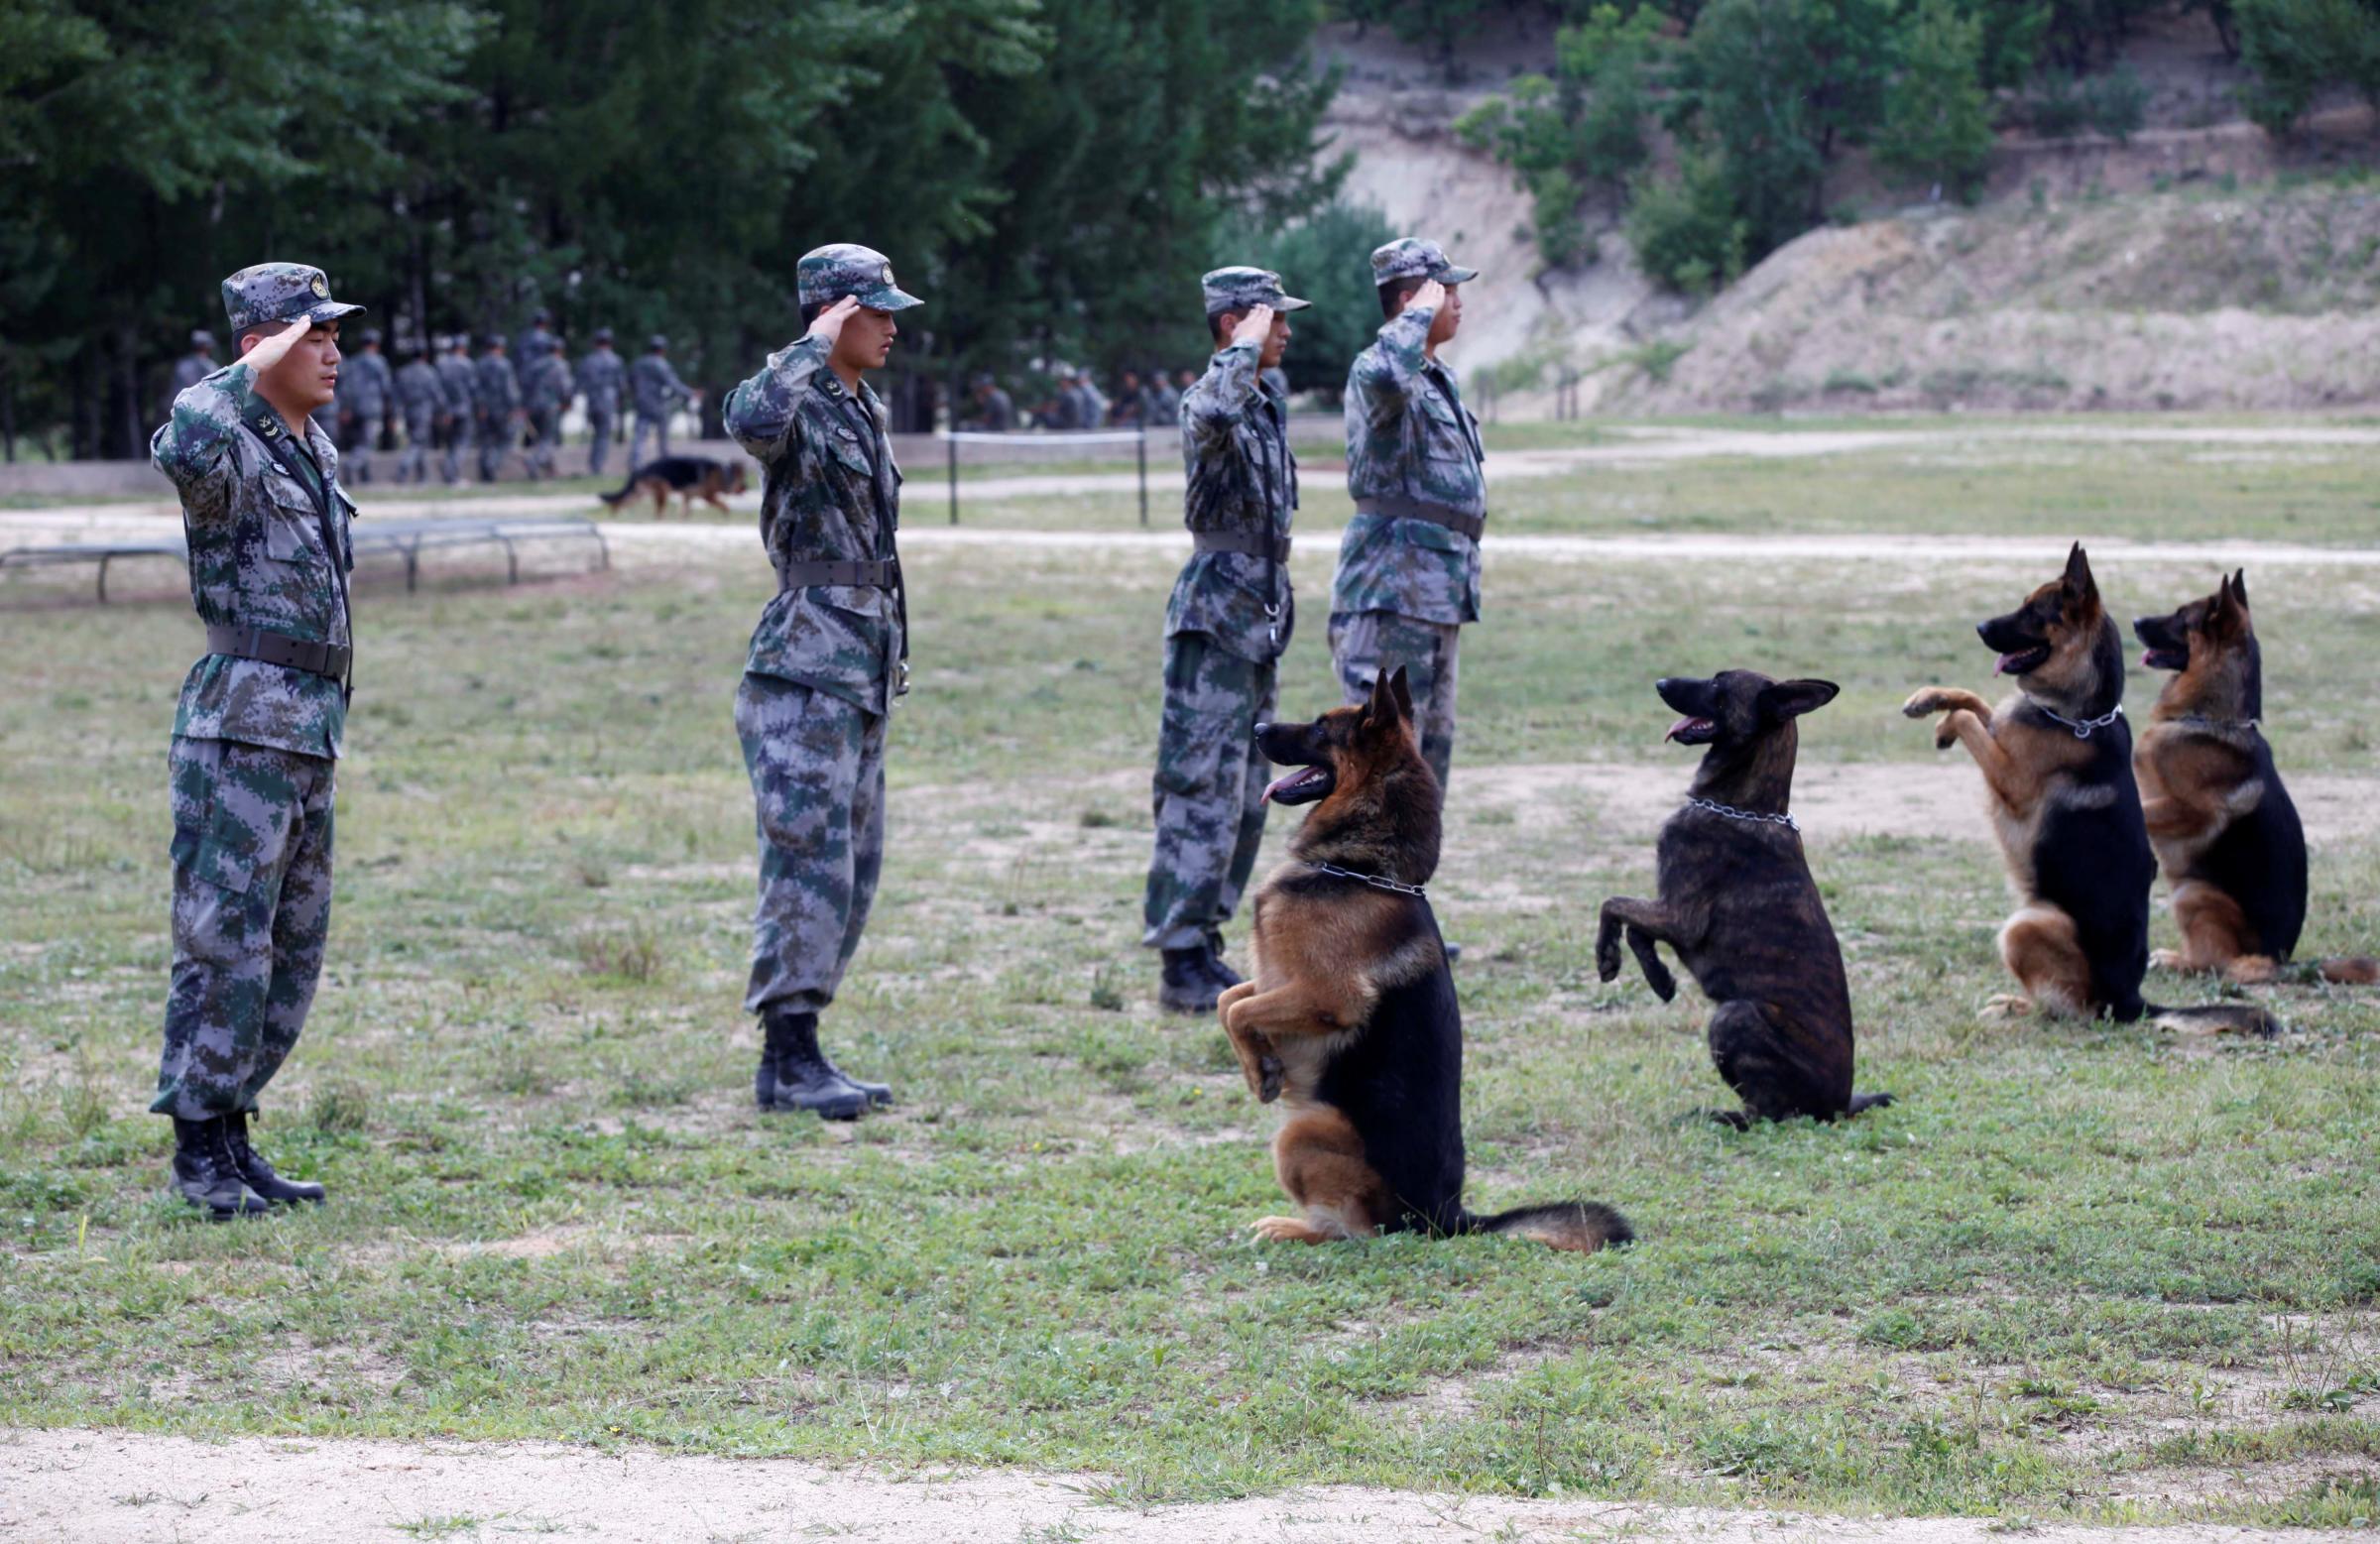 Soldiers of Chinese People's Liberation Army salute as they perform with their dogs before a dog training competition, in Heihe, China, on Aug. 16, 2016.